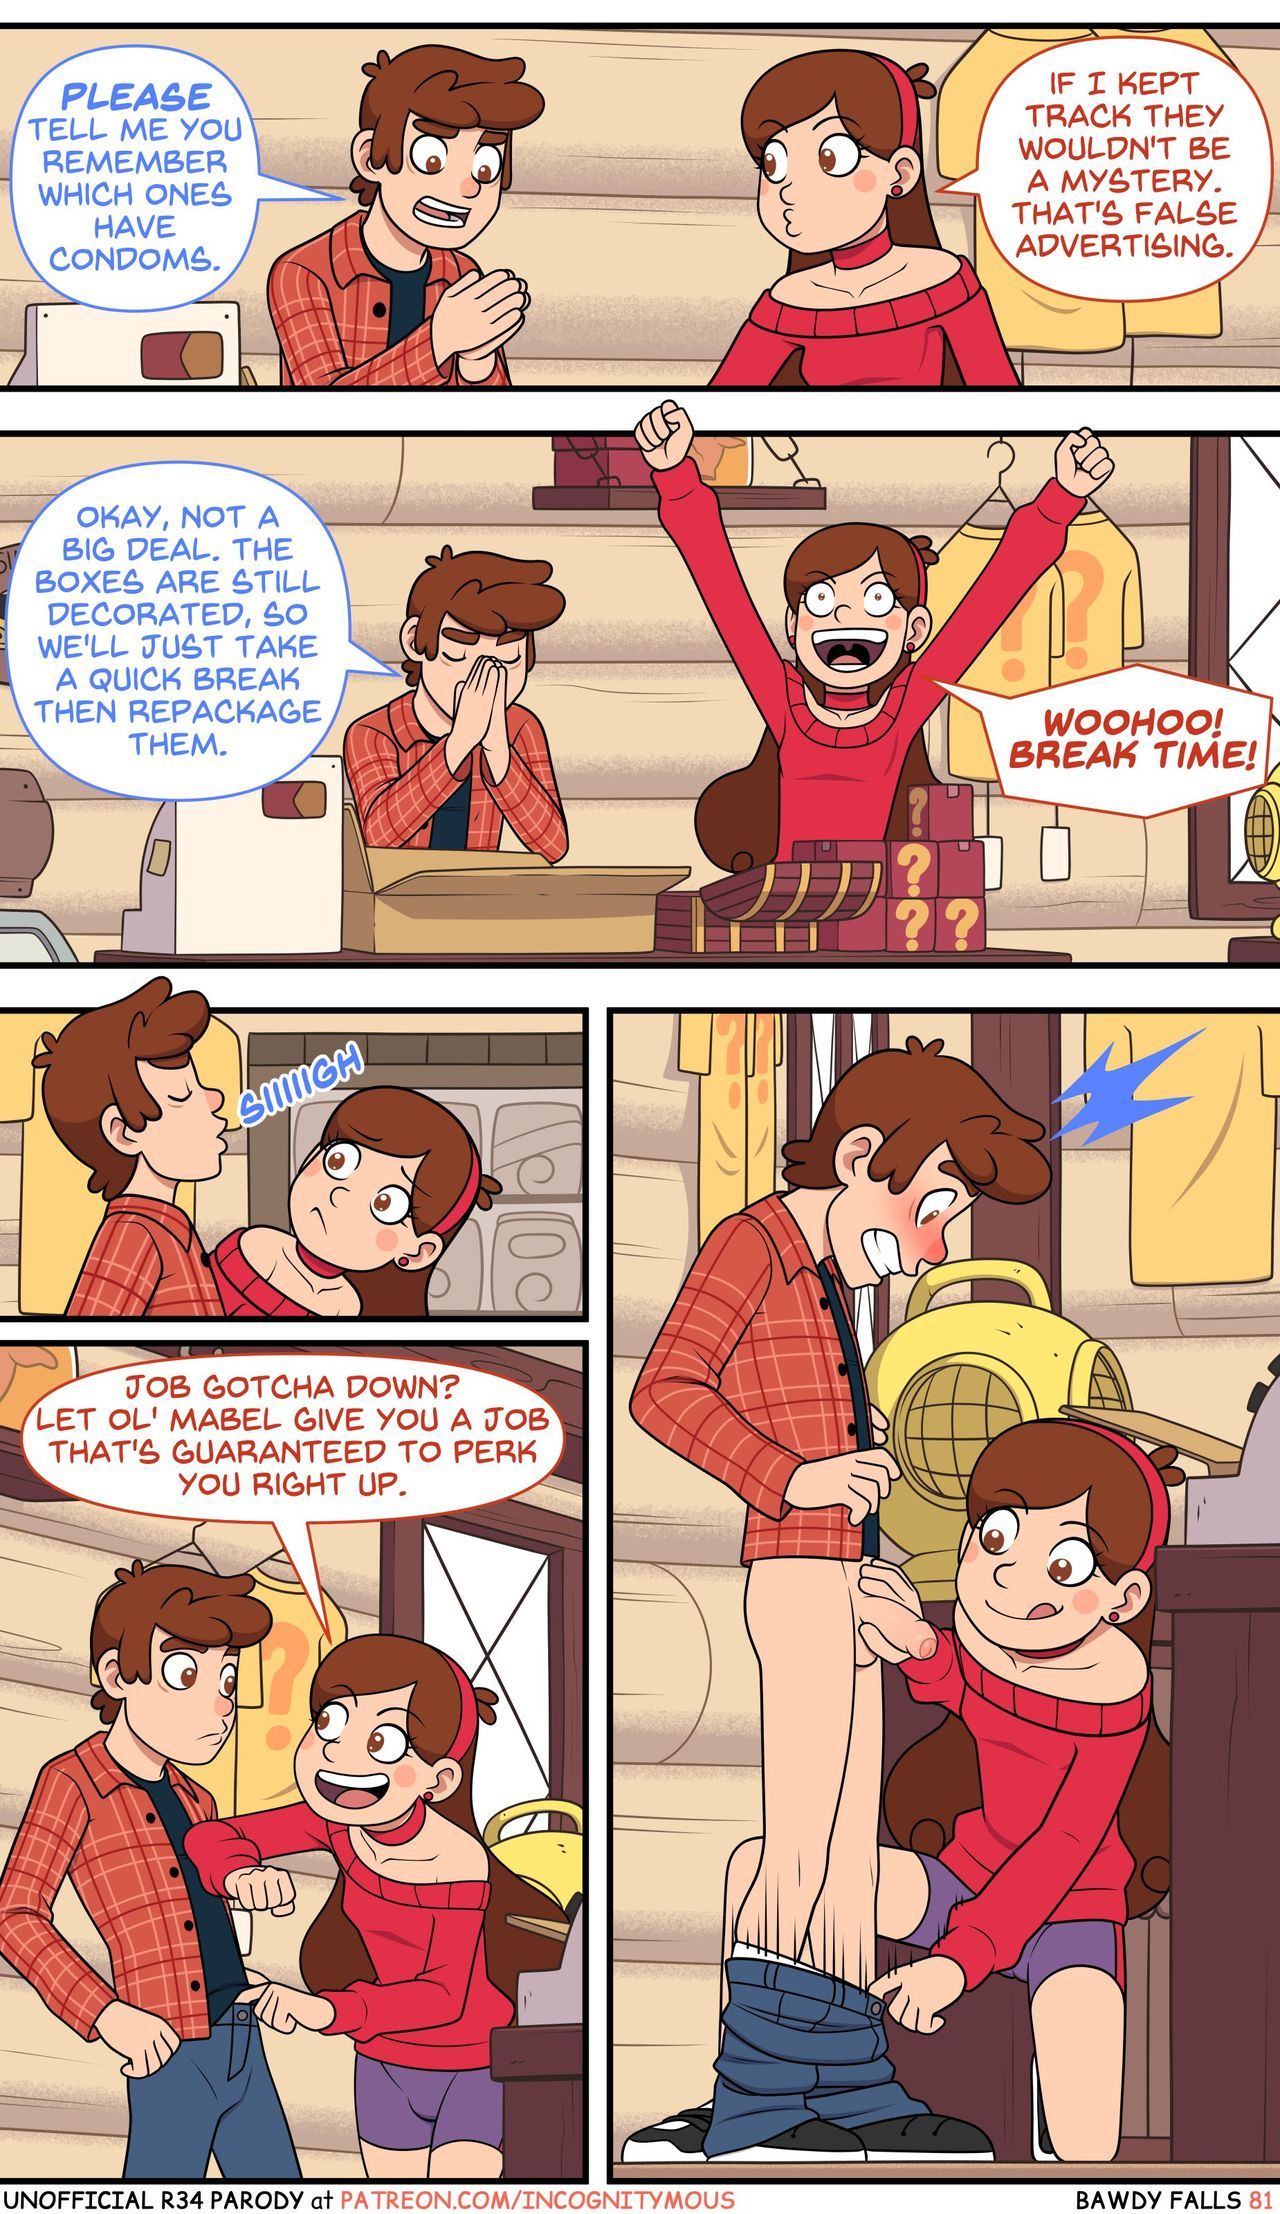 [Incognitymous] Bawdy Falls (Gravity Falls) ongoing 82